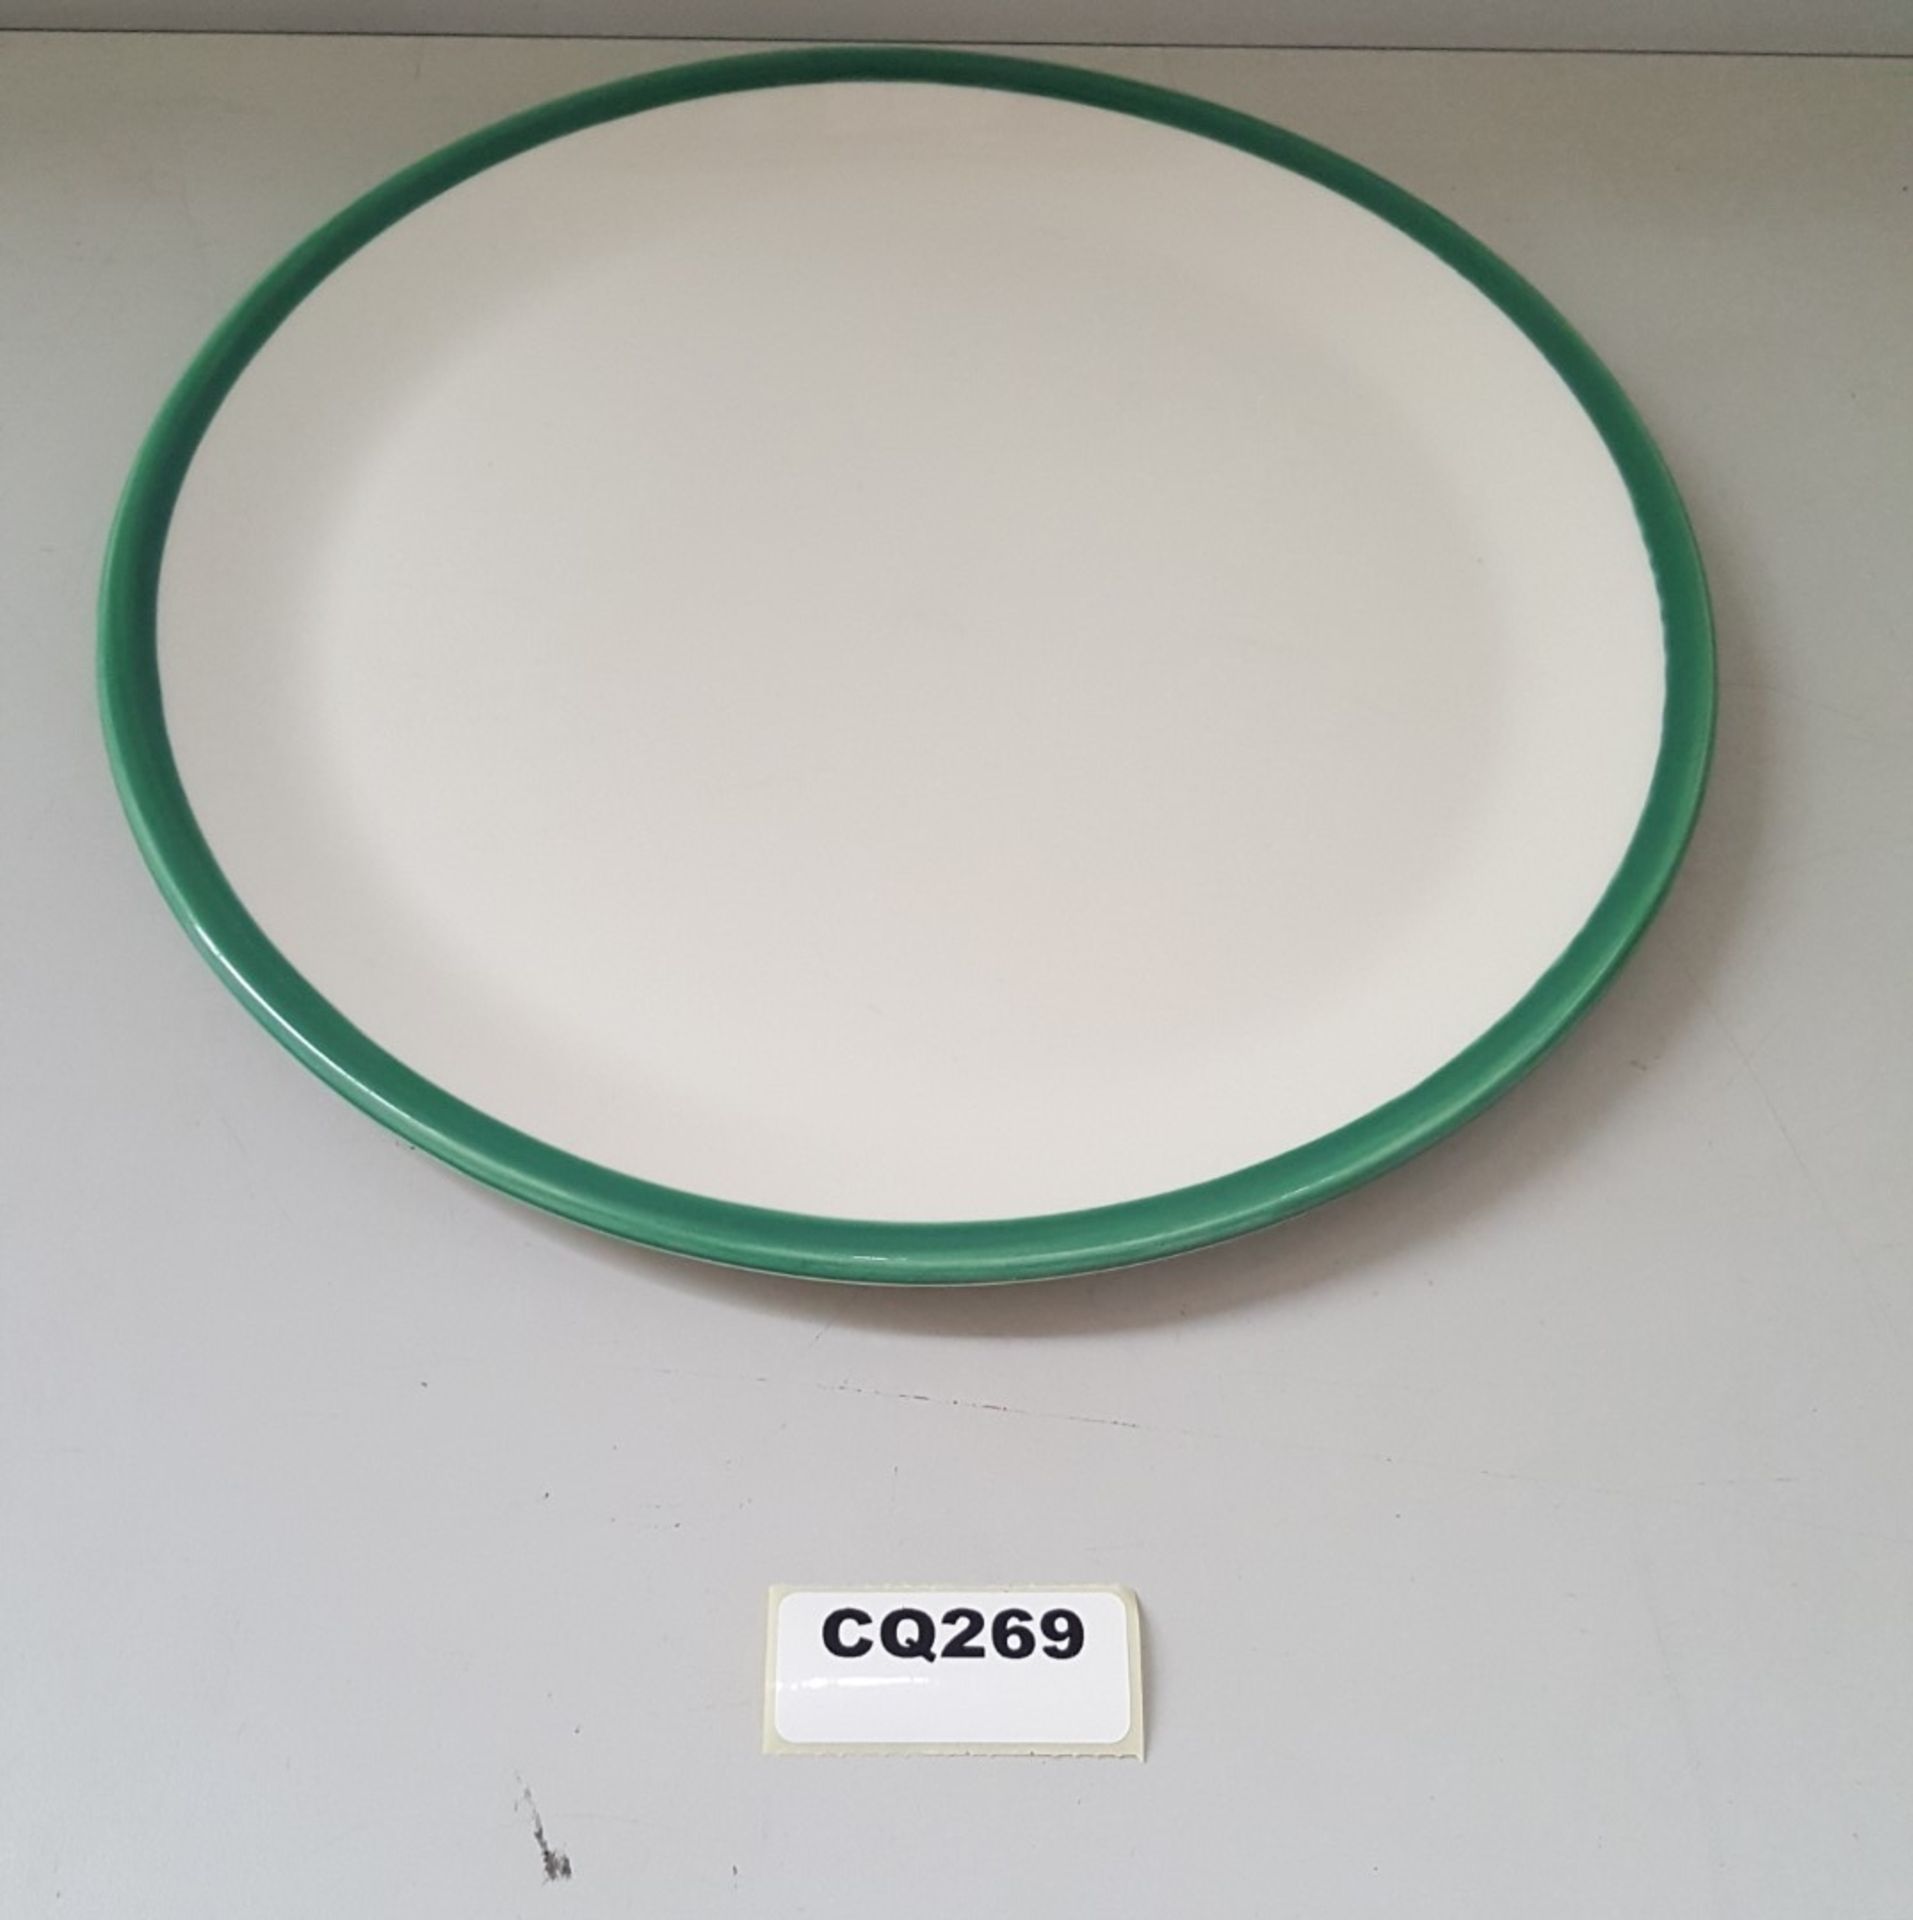 20 x Steelite Coupe Plates White With Green Outline Egde 27.5CM - Ref CQ269 - Image 4 of 4